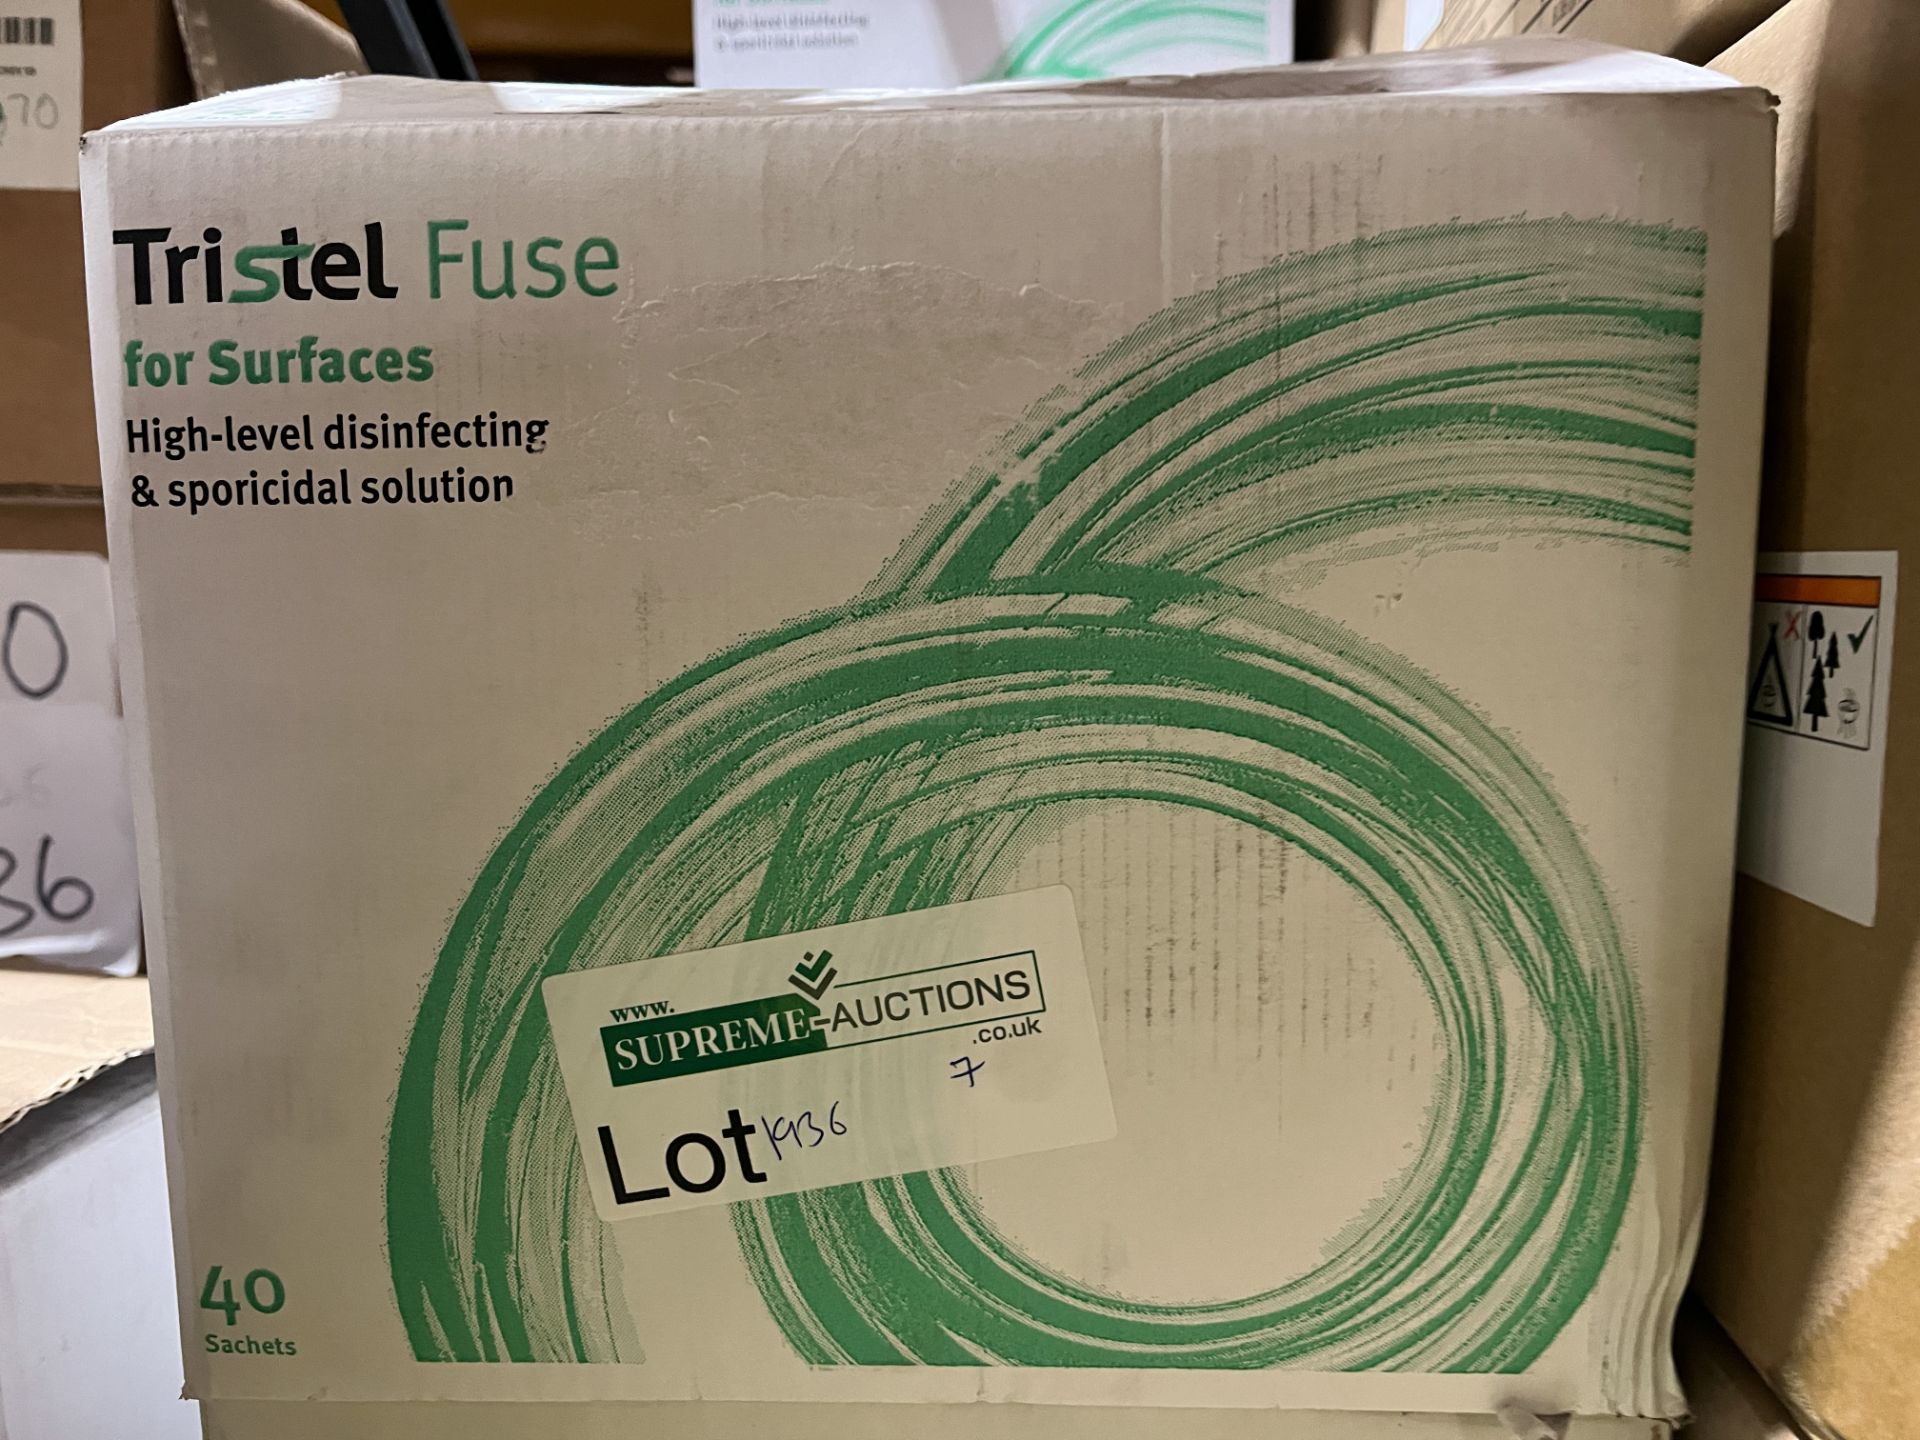 10 X BRAND NEW PACKS OF 40 TRISTEL FUSE HIGH LEVEL DISINFECTANT AND SPORICIDE SOLUTION R9-9